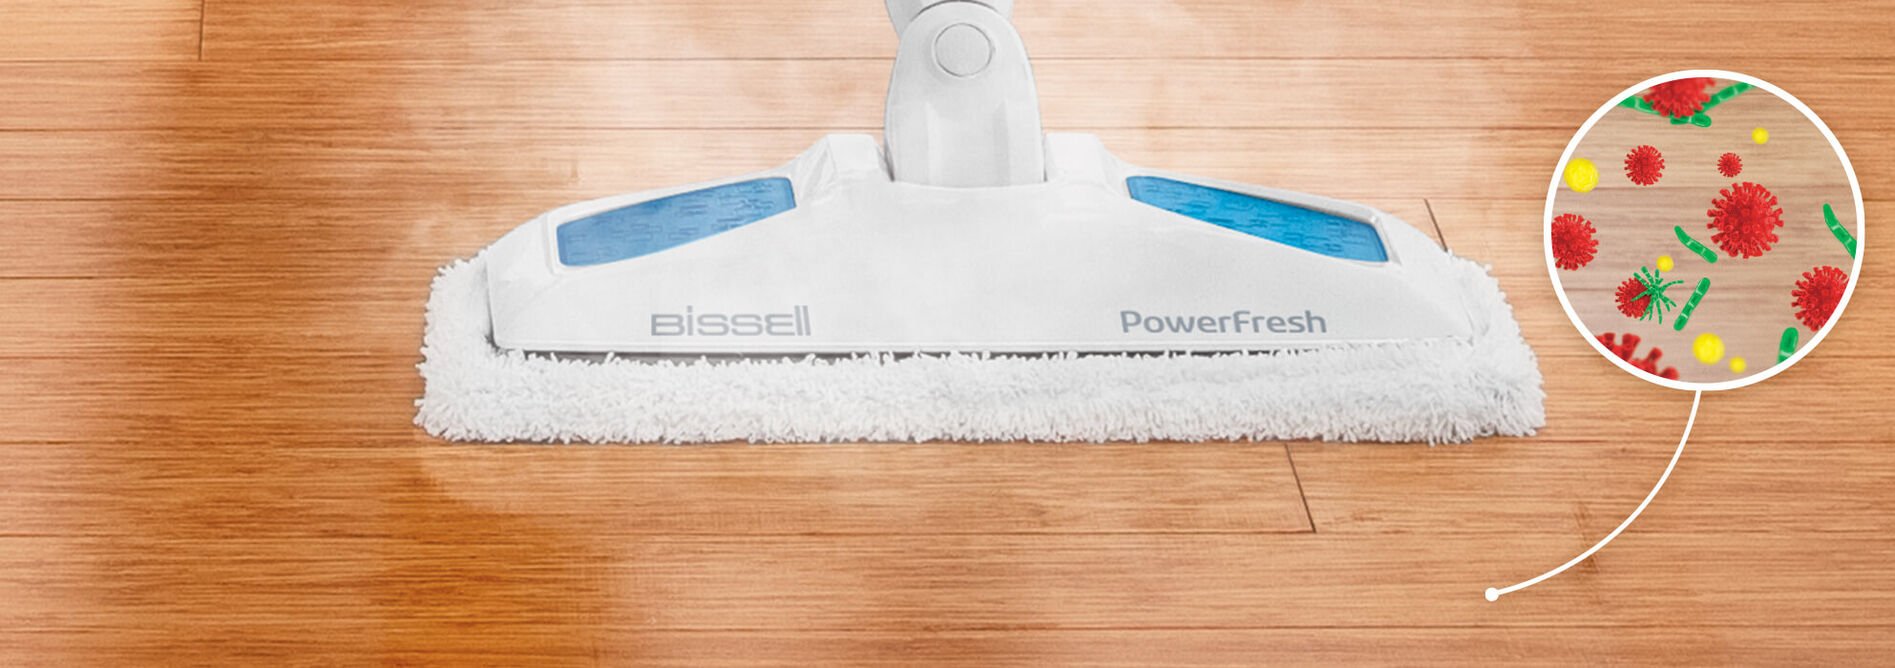  Bissell Power Fresh Steam Mop with Natural Sanitization, Floor  Steamer, Tile Cleaner, and Hard Wood Floor Cleaner with Flip-Down Easy  Scrubber, 1940A : Home & Kitchen